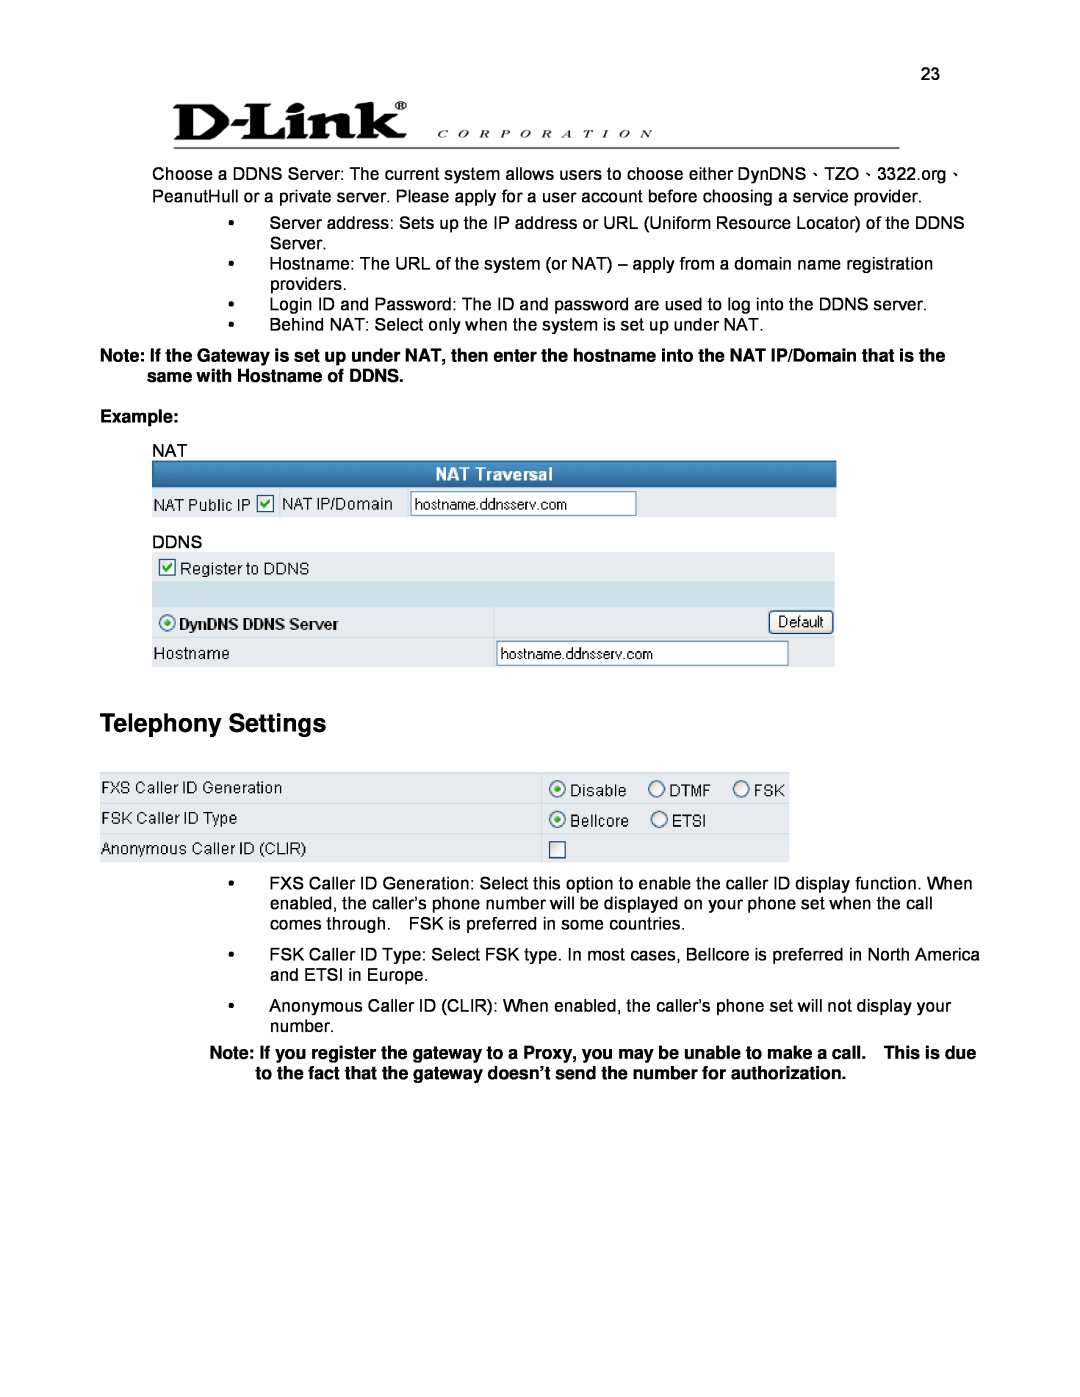 D-Link DVG-2032S user manual Telephony Settings, Example 